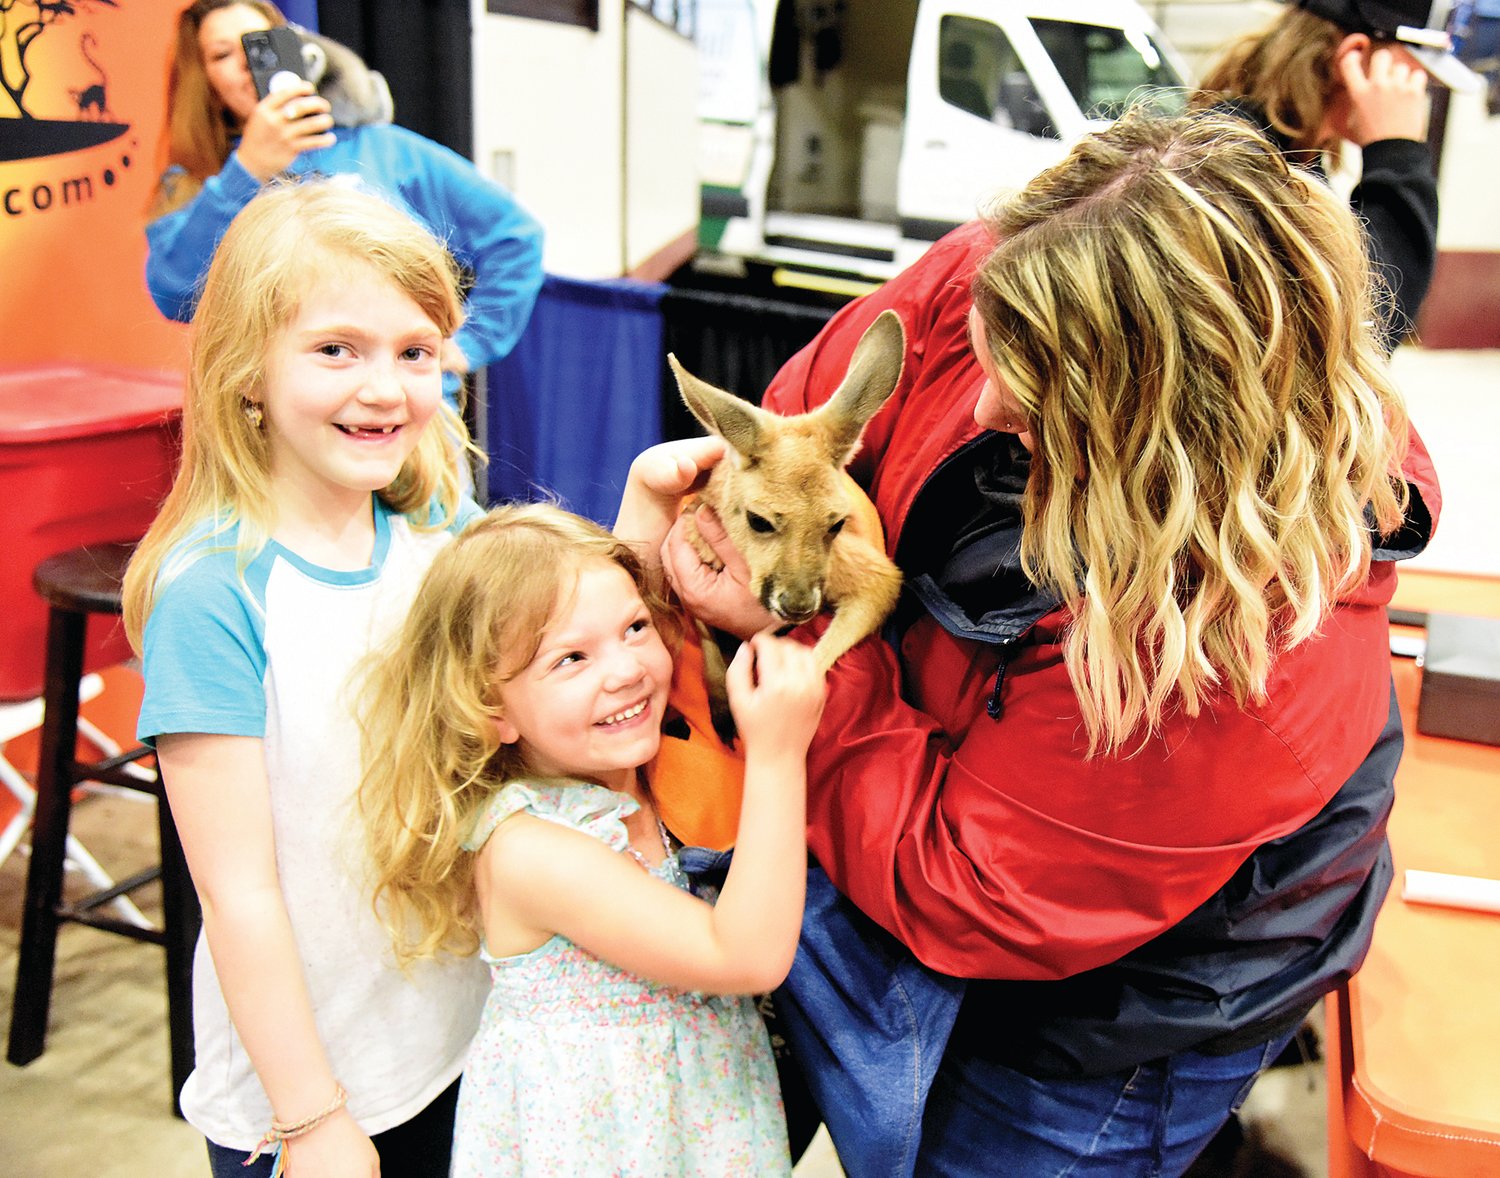 Rowyn Reed, 8, left, and Reagan Reed, 4, are all smiles as their mother, Rechelle Reed, holds a kangaroo while their father Ryan Reed takes photos Saturday at the Home and Garden Show hosted by the Democrat inside the Mathewson Exhibition Center. For $5, vendor Thorni Ridge Exotics offered visitors the opportunity to have a selfie with a kangaroo, lemur and alligator.